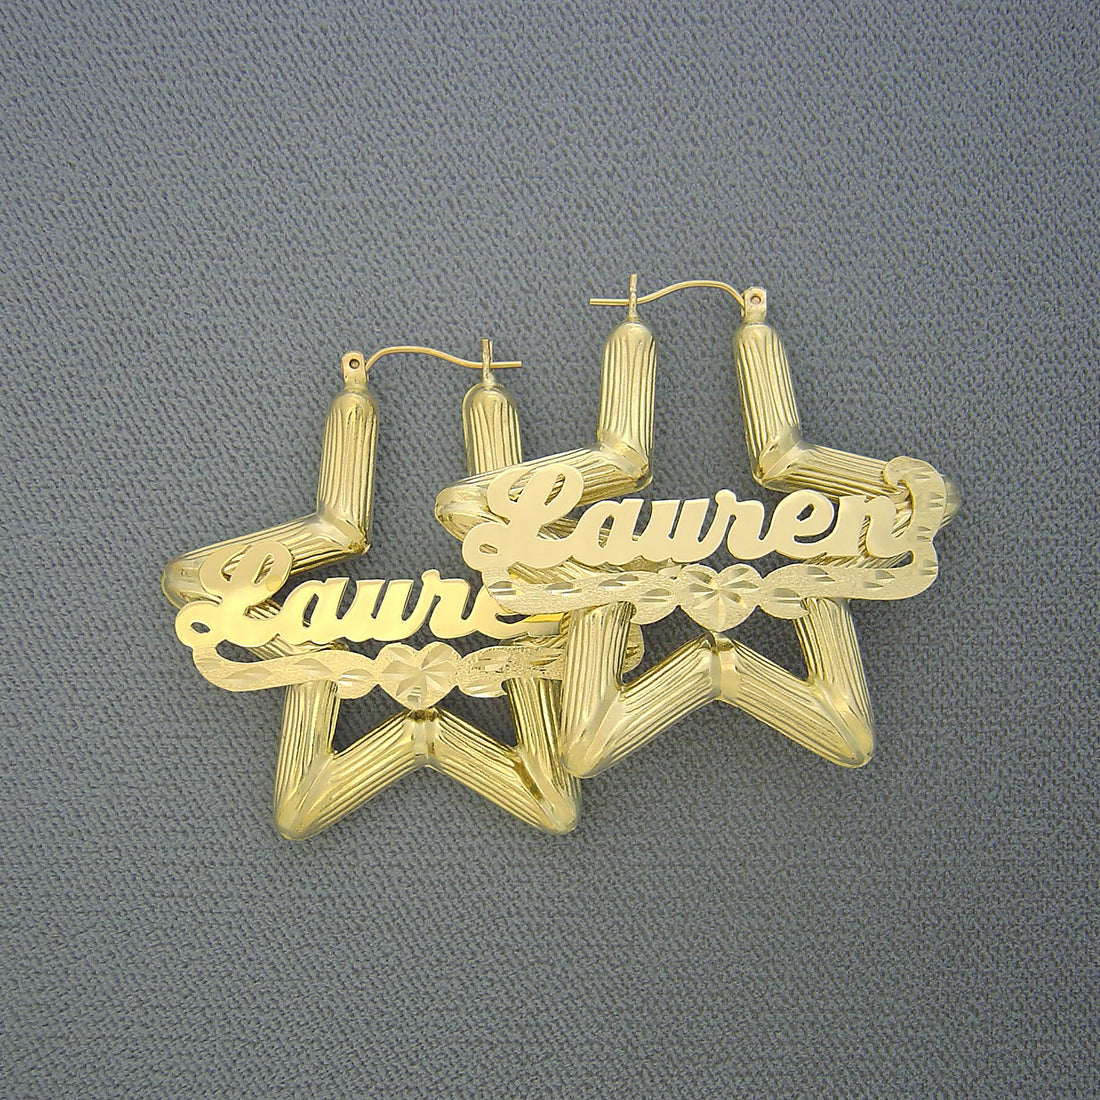 10K Gold Star Bamboo Personalized Shiny Name Earrings 1.75 Inch Diamond Cut Heart Underneath Design